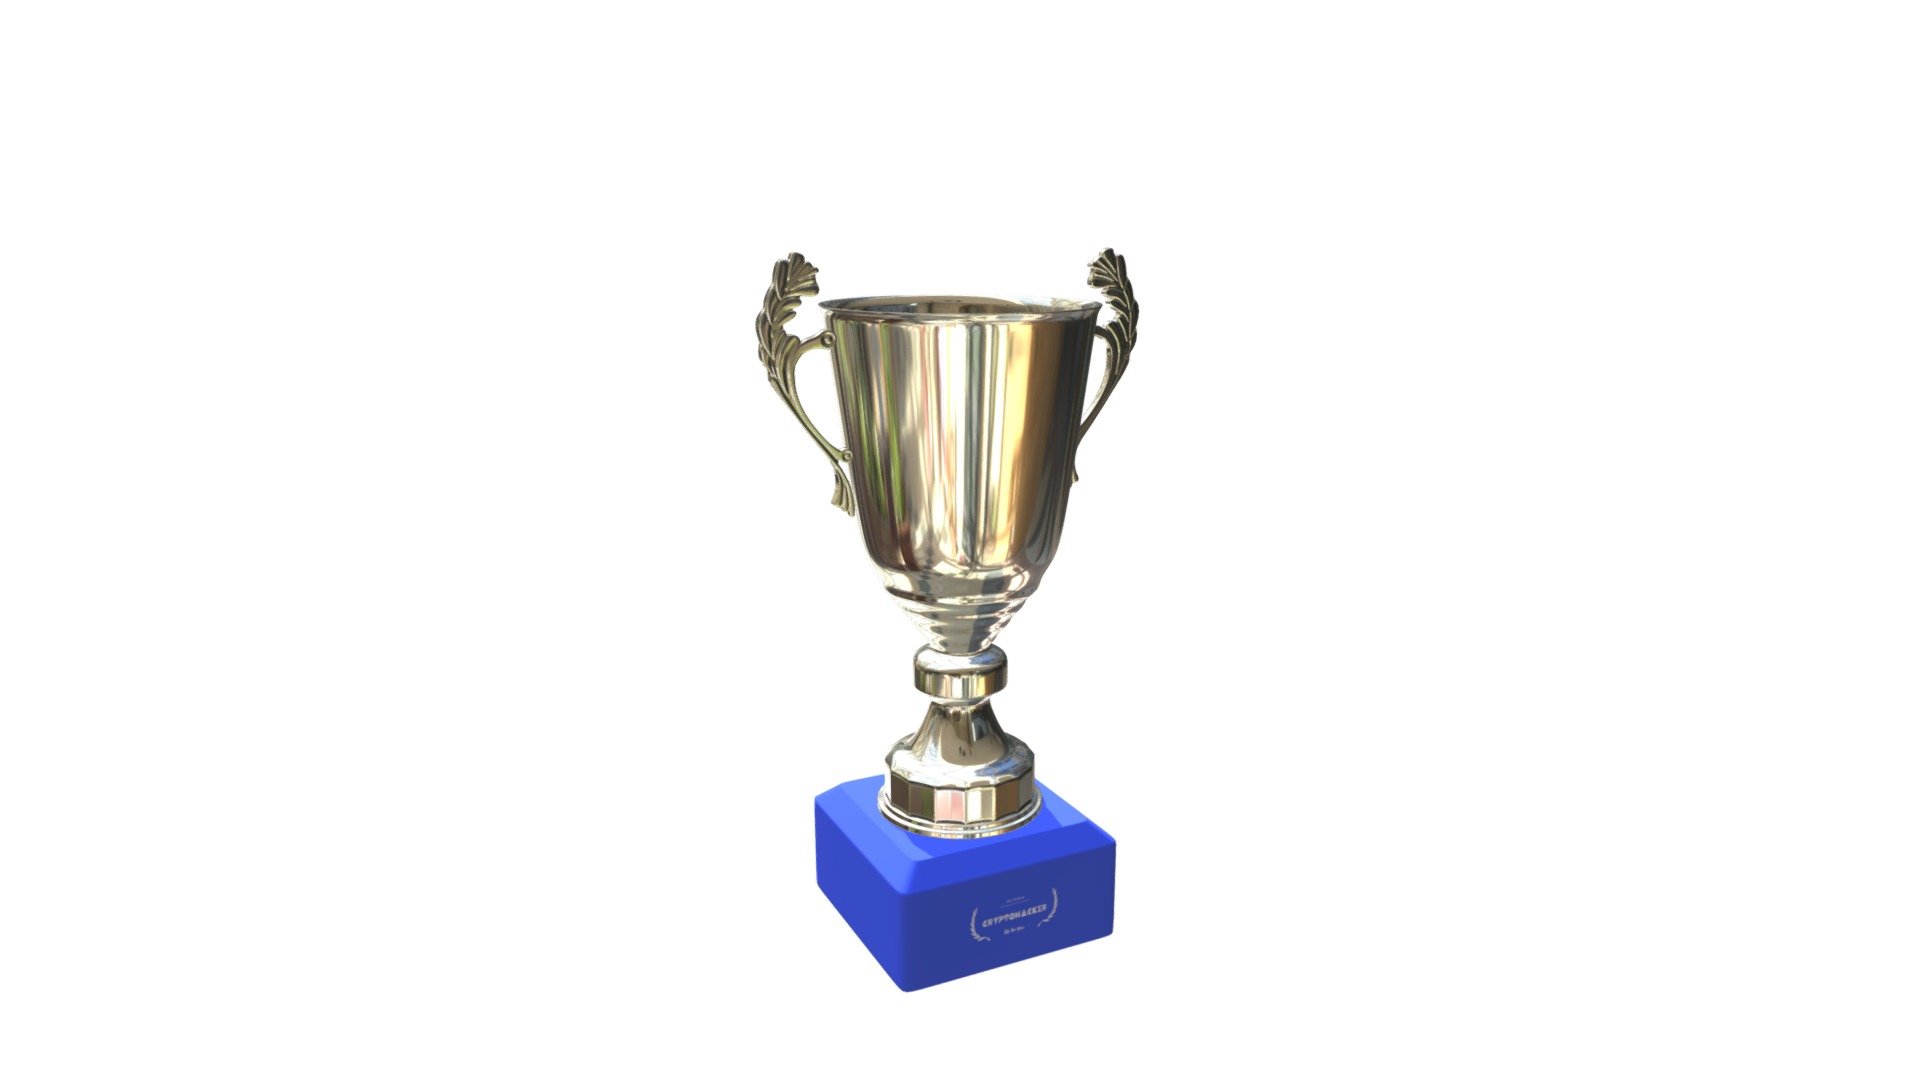 👋

This fantastic trophy was created by a friend of mine. It's an exclusive work for my project - https://cryptohackers.party.

CryptoHackers interviews cryptocurrency industry leaders. Founders of great companies and startups tell inspiring story about their products, teams and backgrounds 3d model